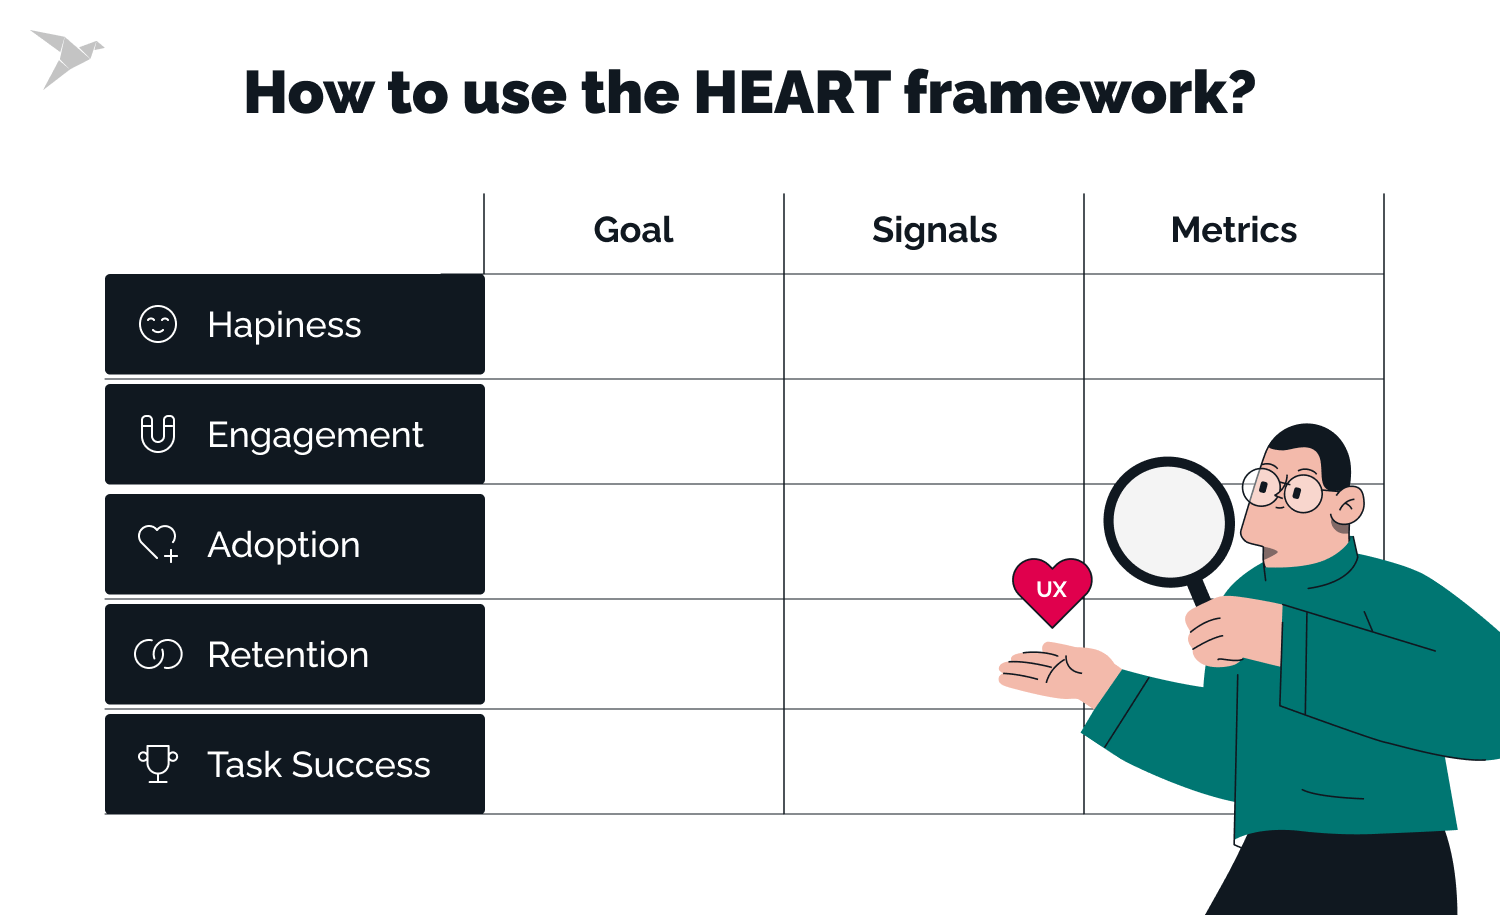 How to Use the HEART framework?